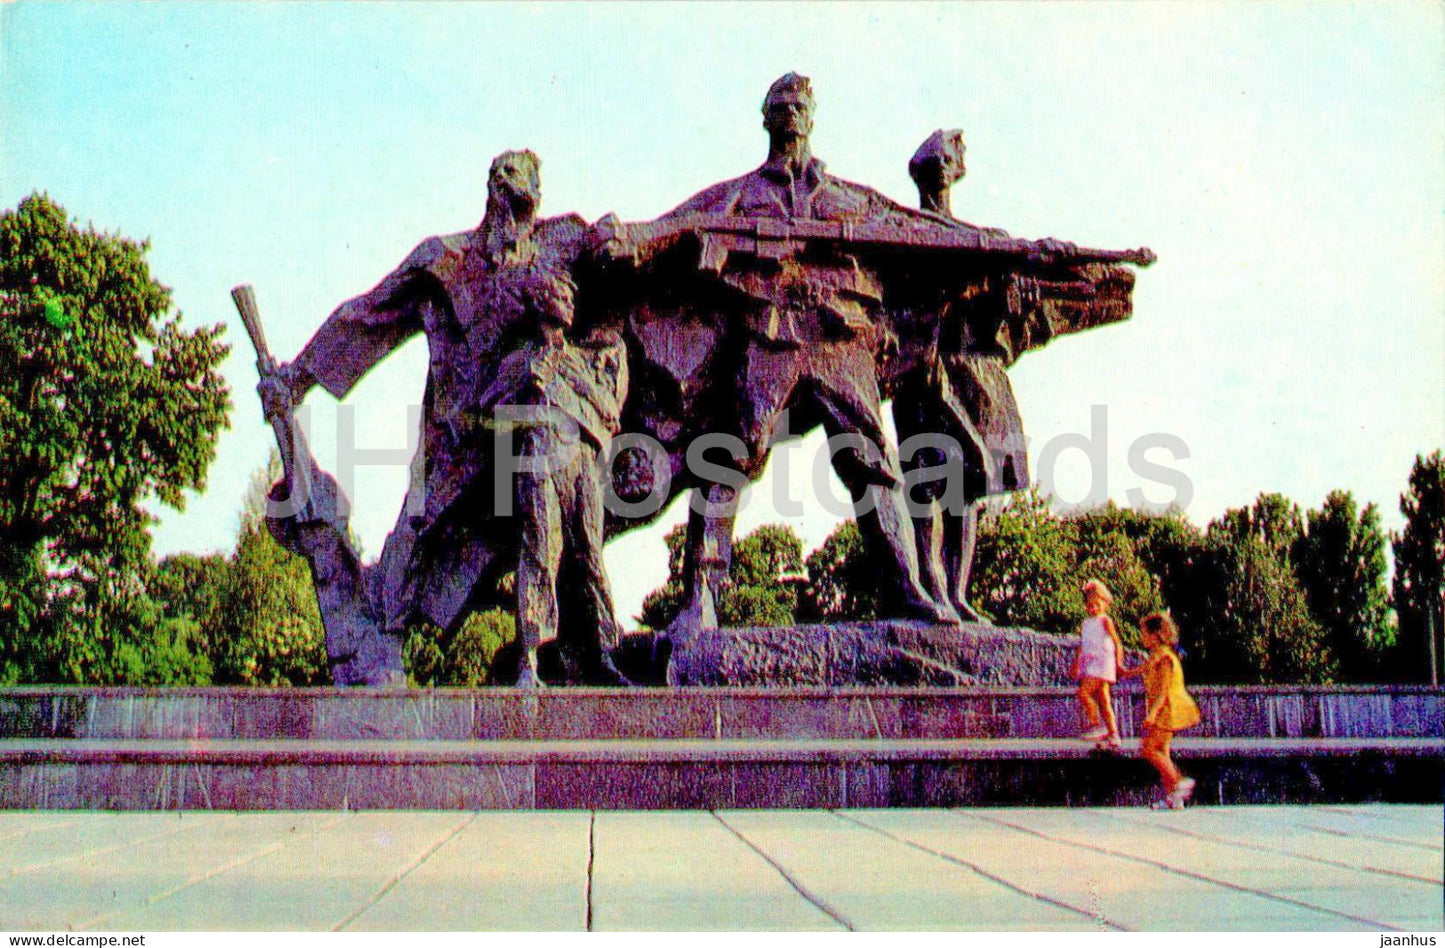 Sumy - monument to the heroes of Sumy region - military monument - 1976 - Ukraine USSR - unused - JH Postcards